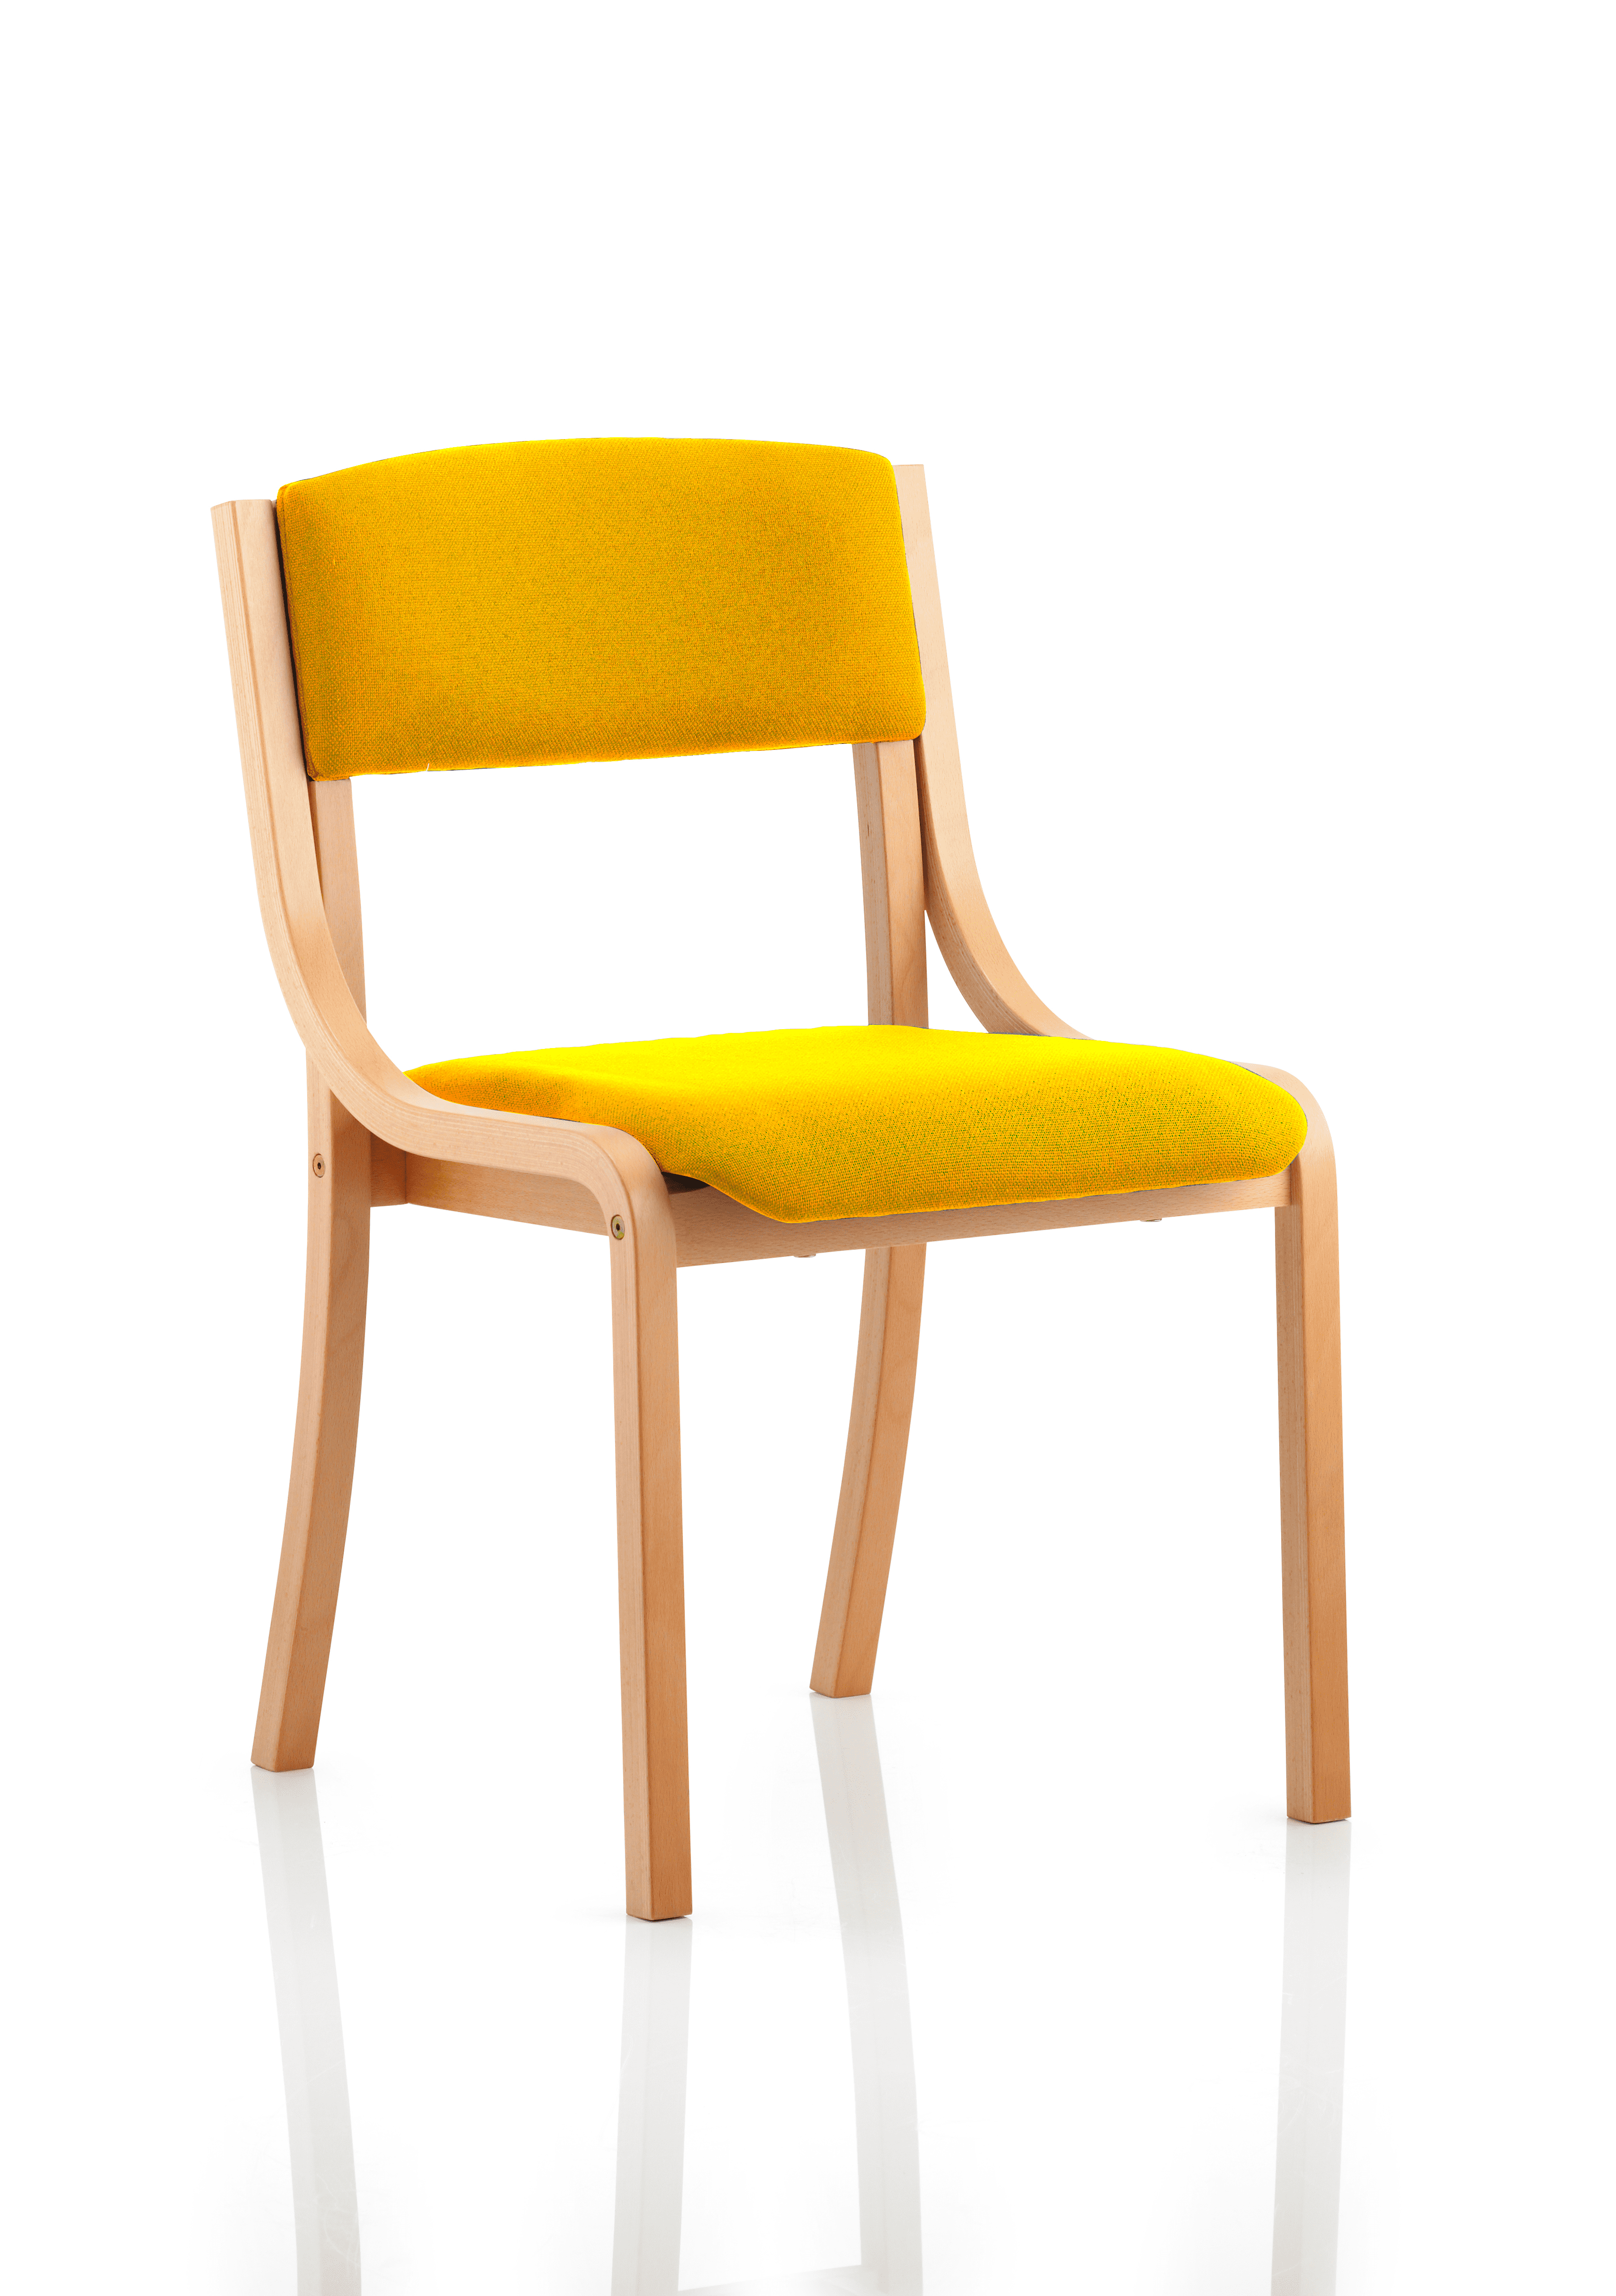 Madrid Fabric Conference Chair with Wood Frame - No Arms